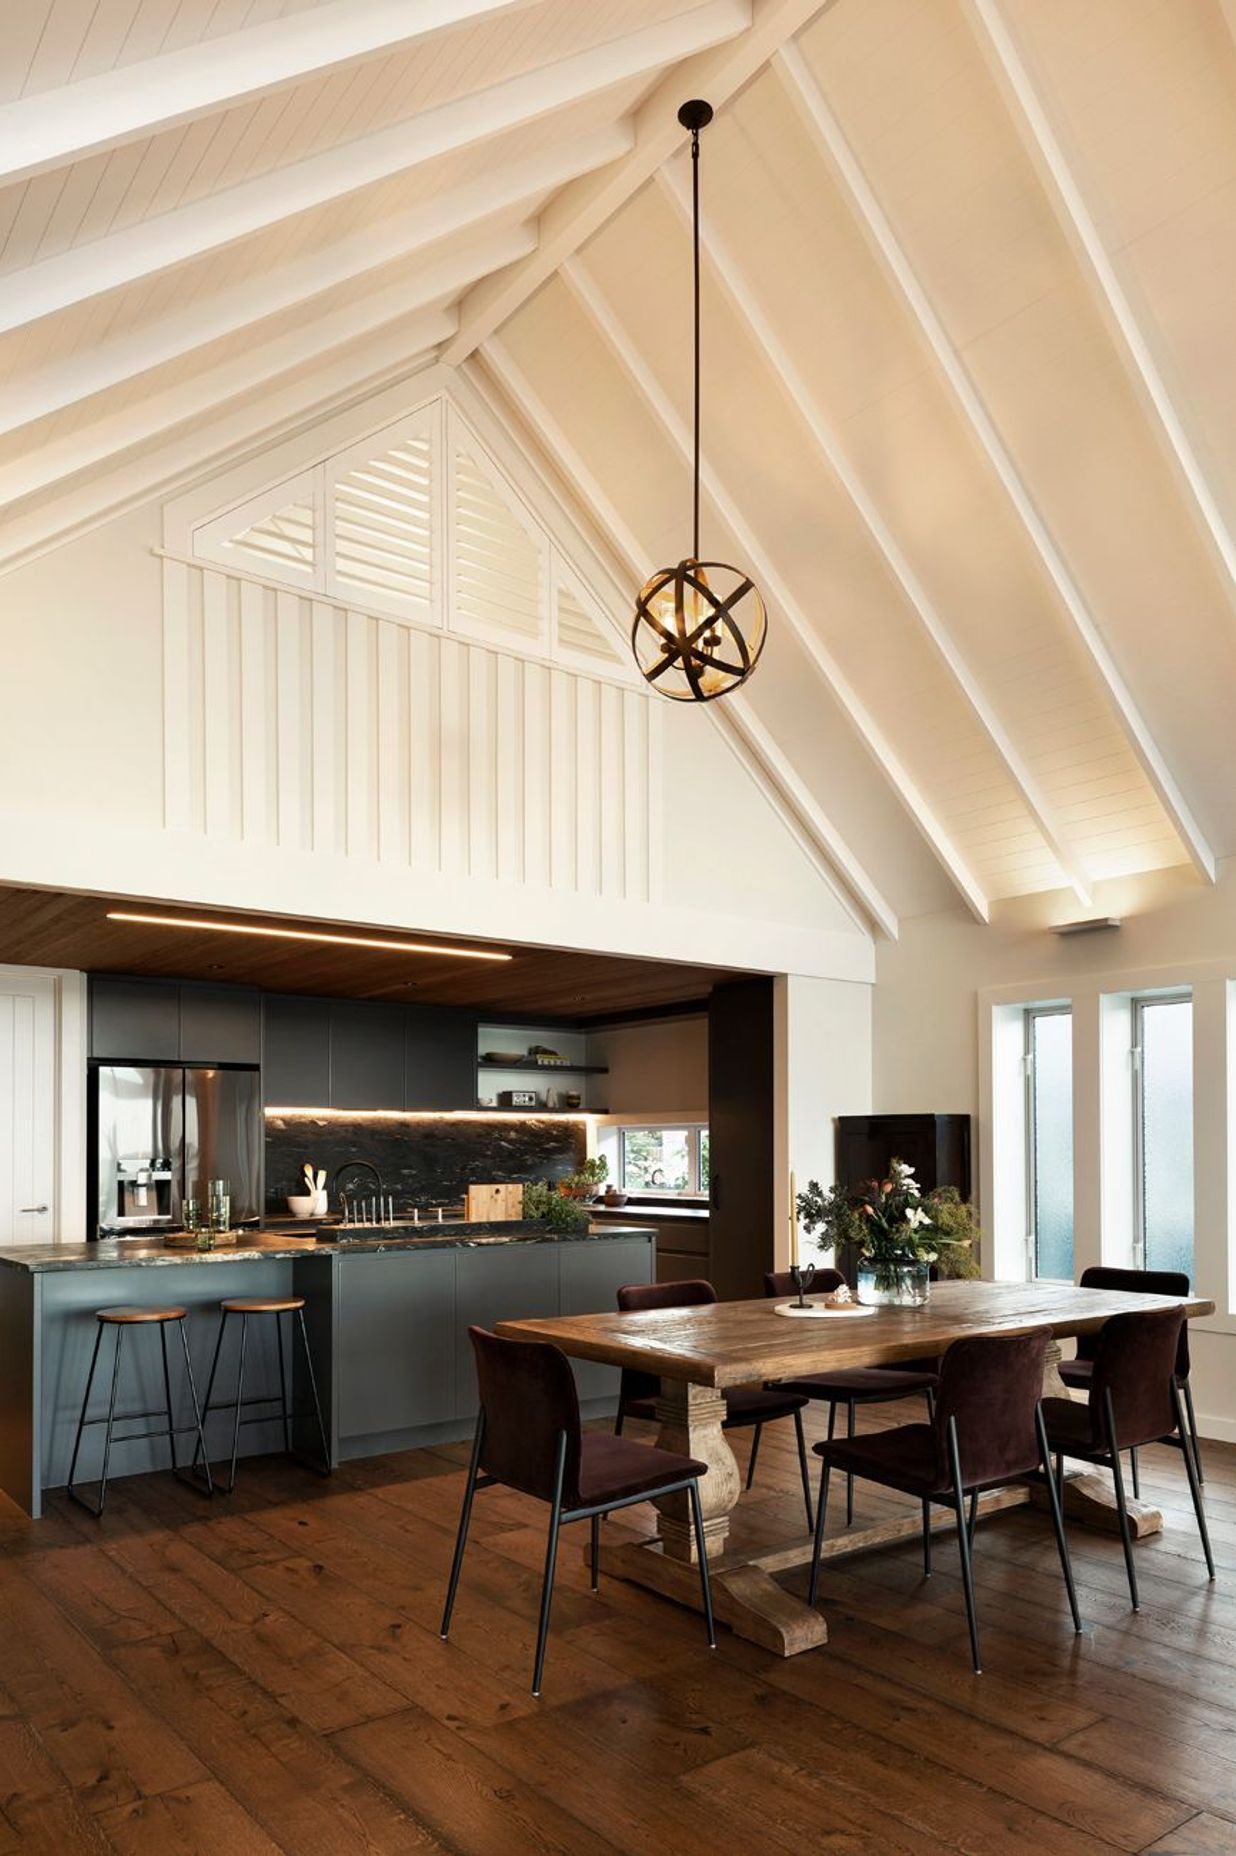 The darker palette of the kitchen, along with the lower ceiling height, allows it to recede into the space, once again directing people's attentions towards the views.